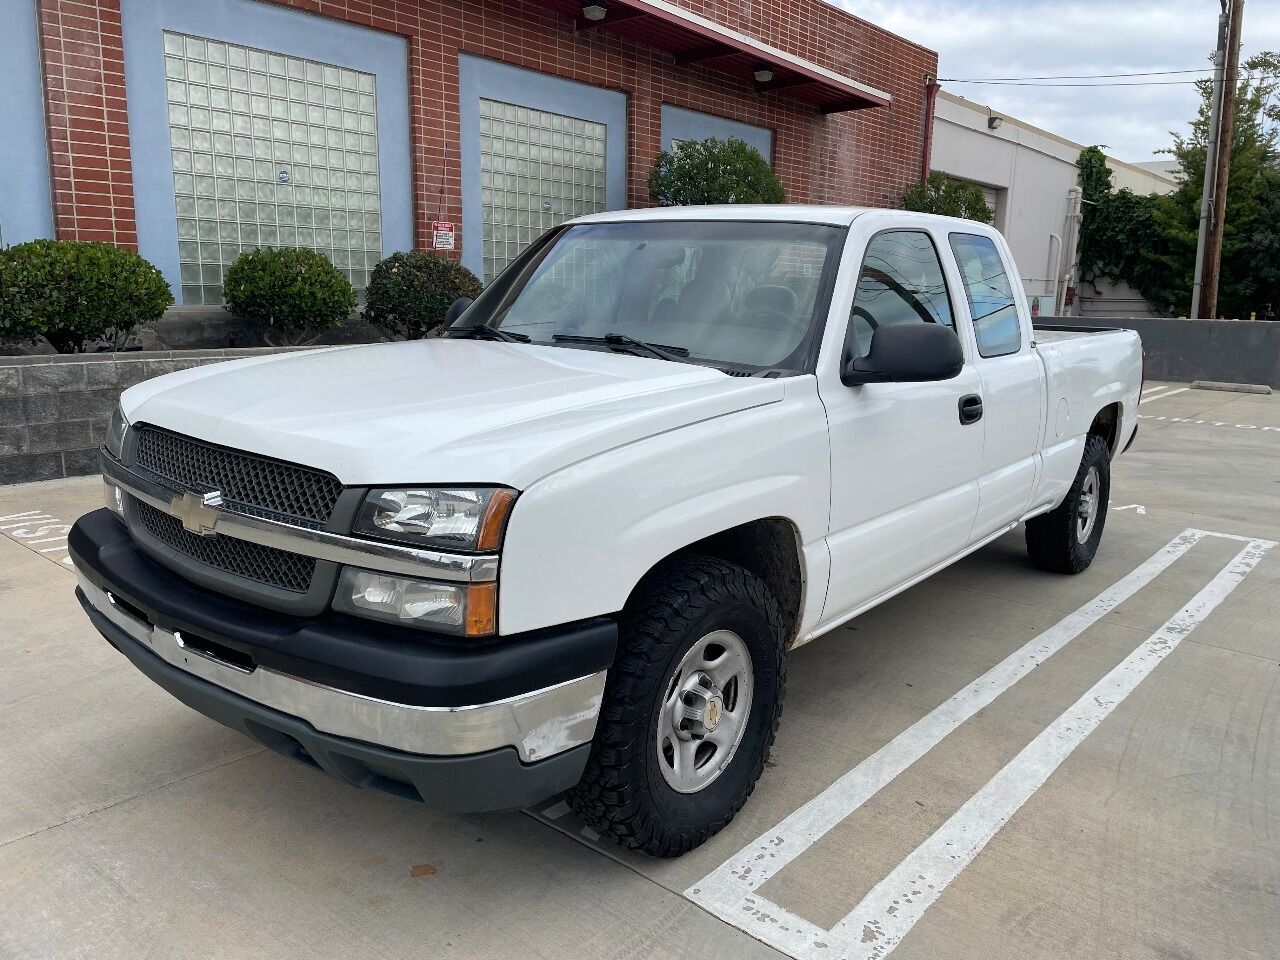 2004 Chevrolet Silverado 1500 Work Truck Extended Cab 4WD